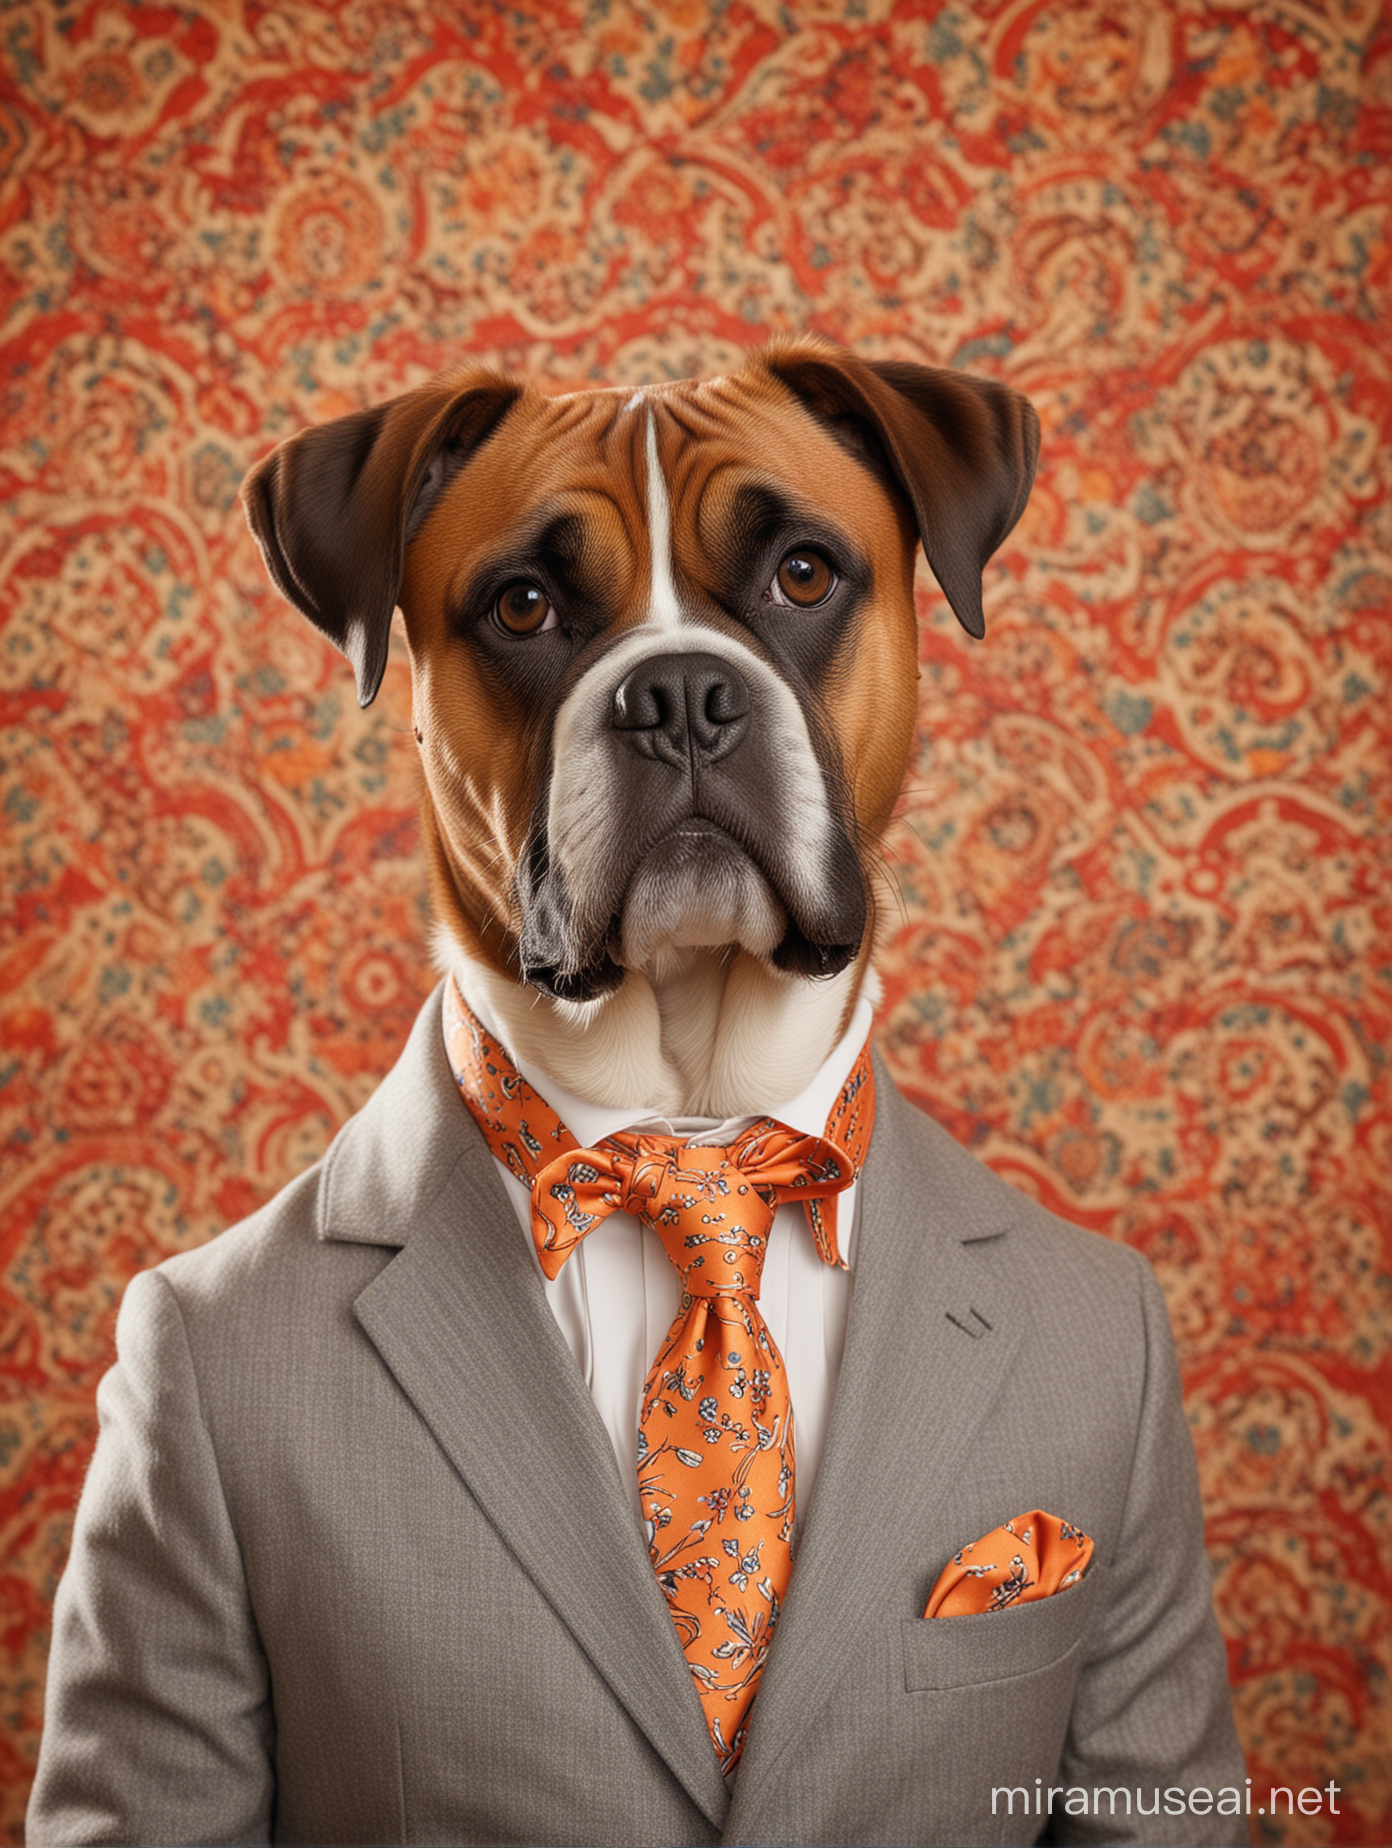 Boxerdog, realistic, f12 aperature photo, dressed formally, colorful ornate background, in the quirky graphic style of Wes Anderson, --no humans, text, blur --v 6